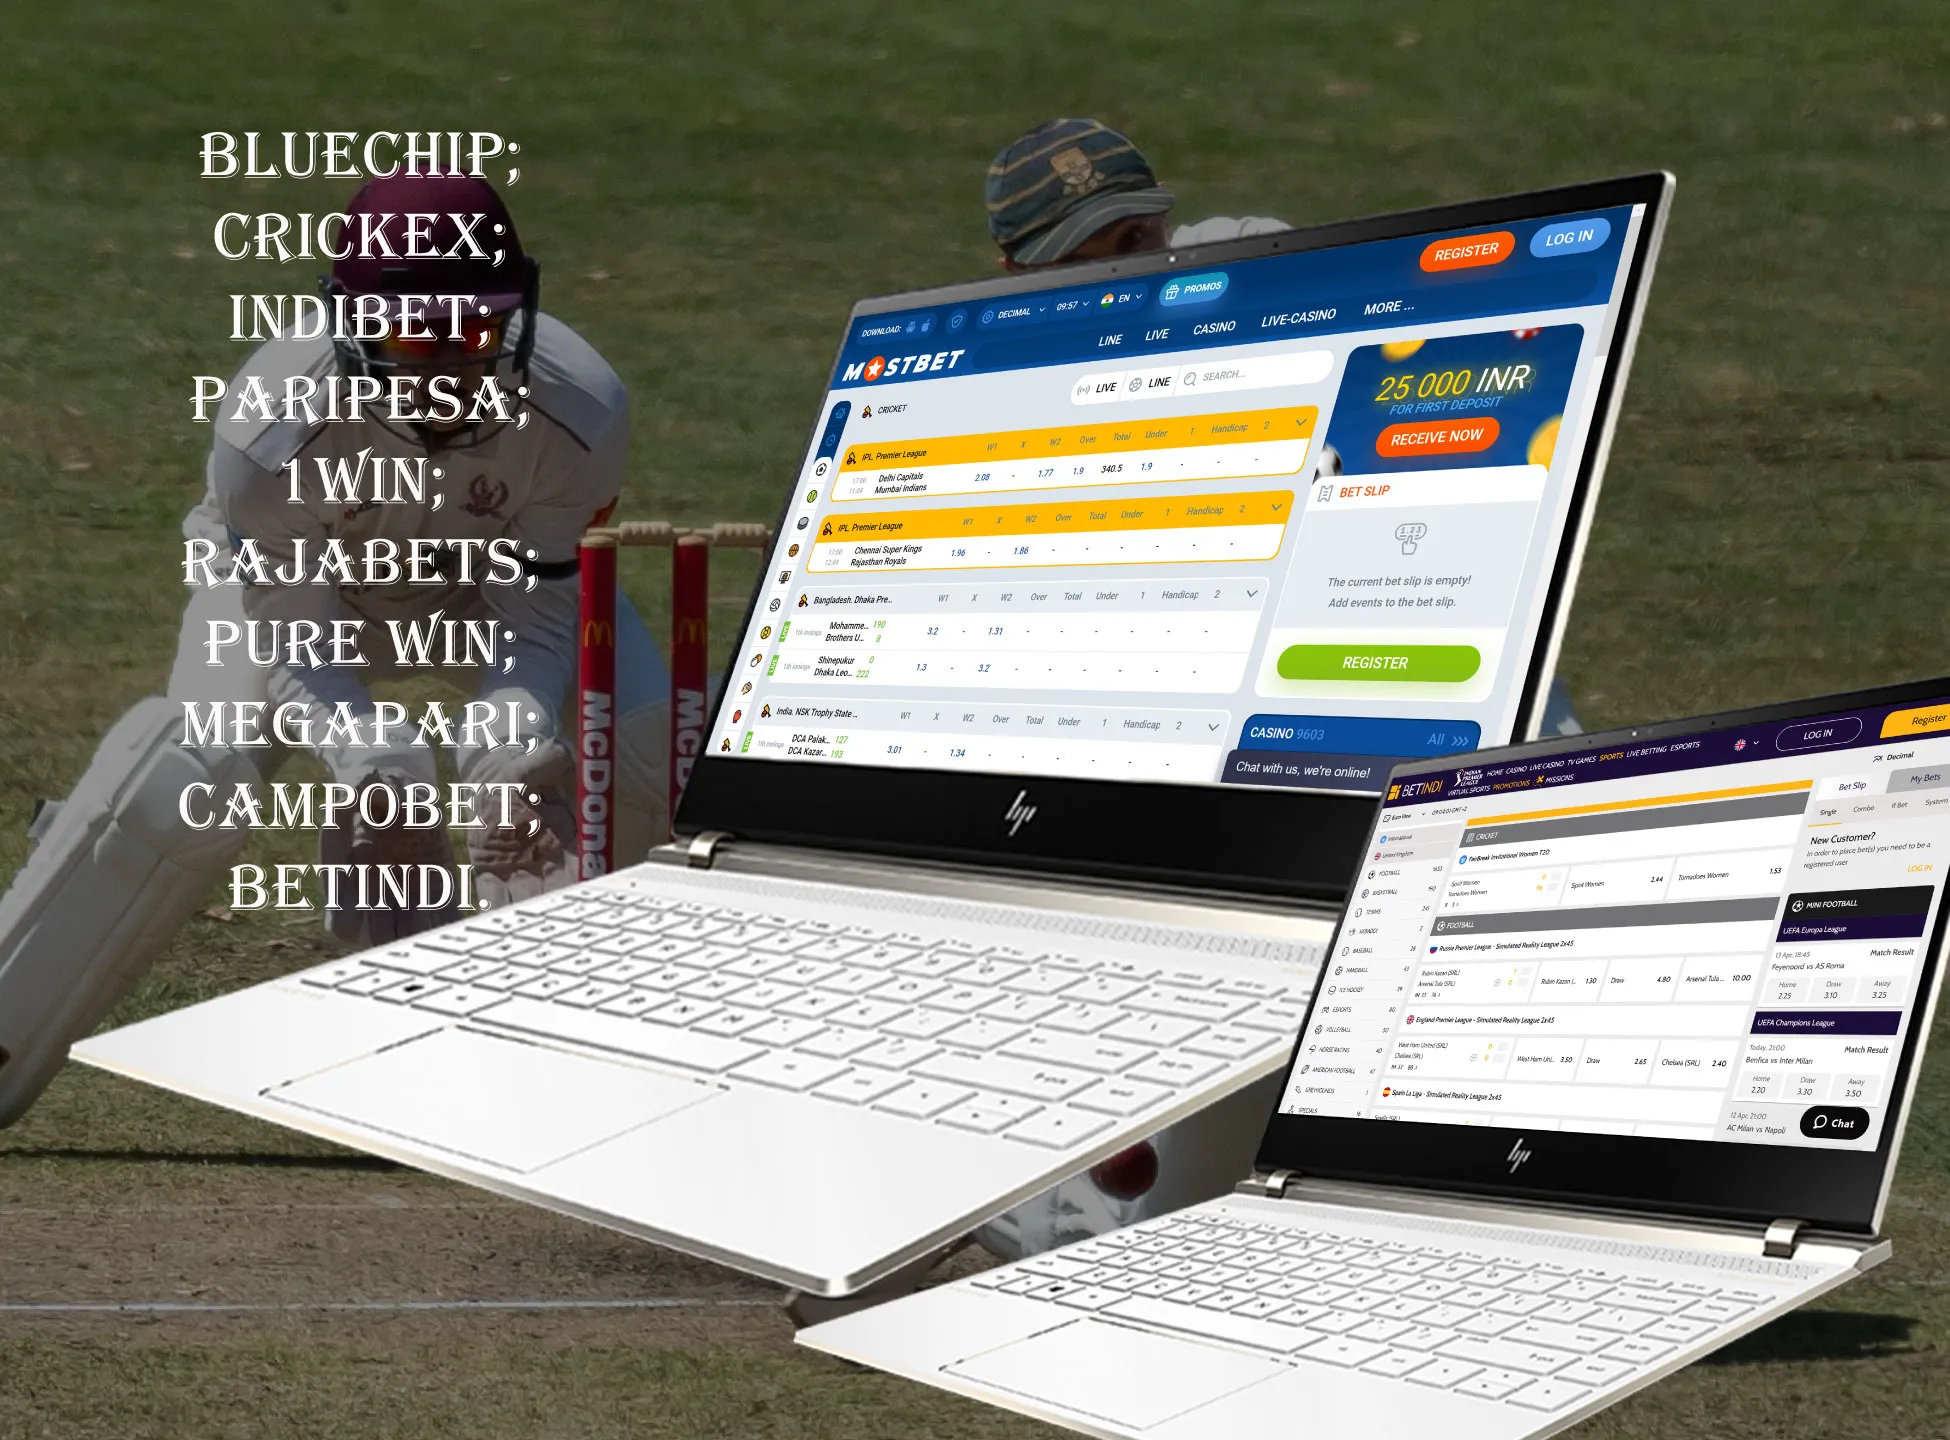 Here is a list of the new bookmakers that are great for the cricket betting.